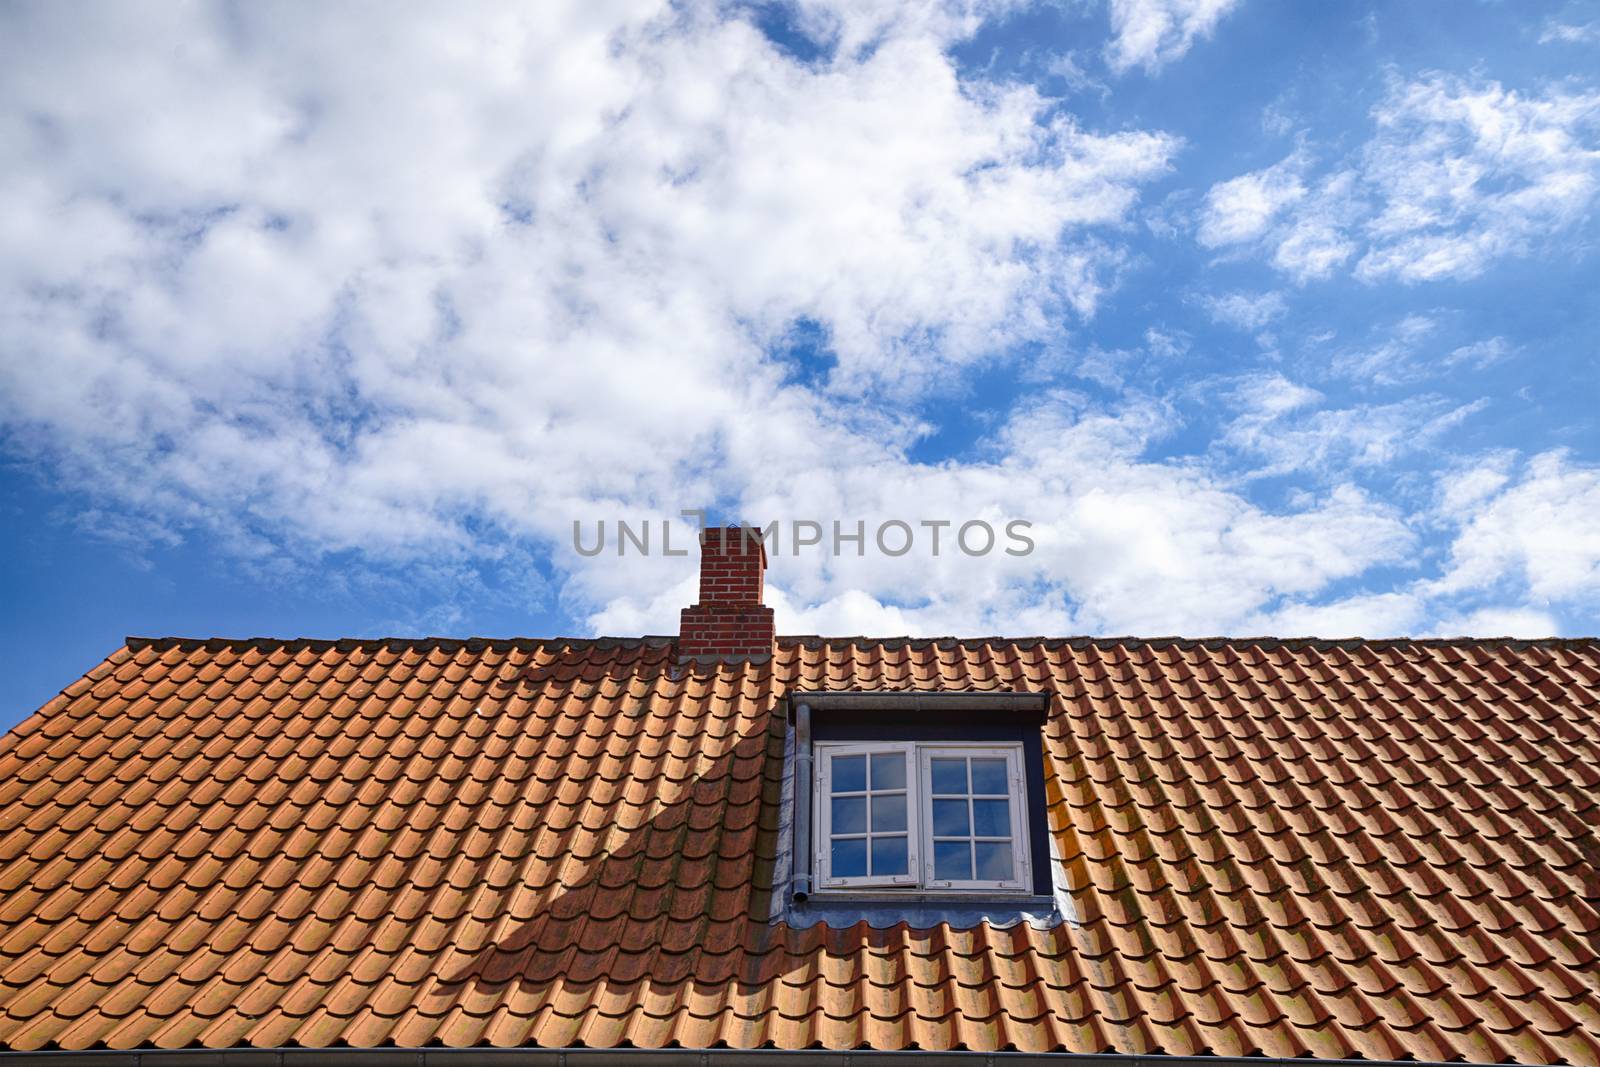 Tiled red roof with a rooftop window and a small chimney under a blue sky in the summer